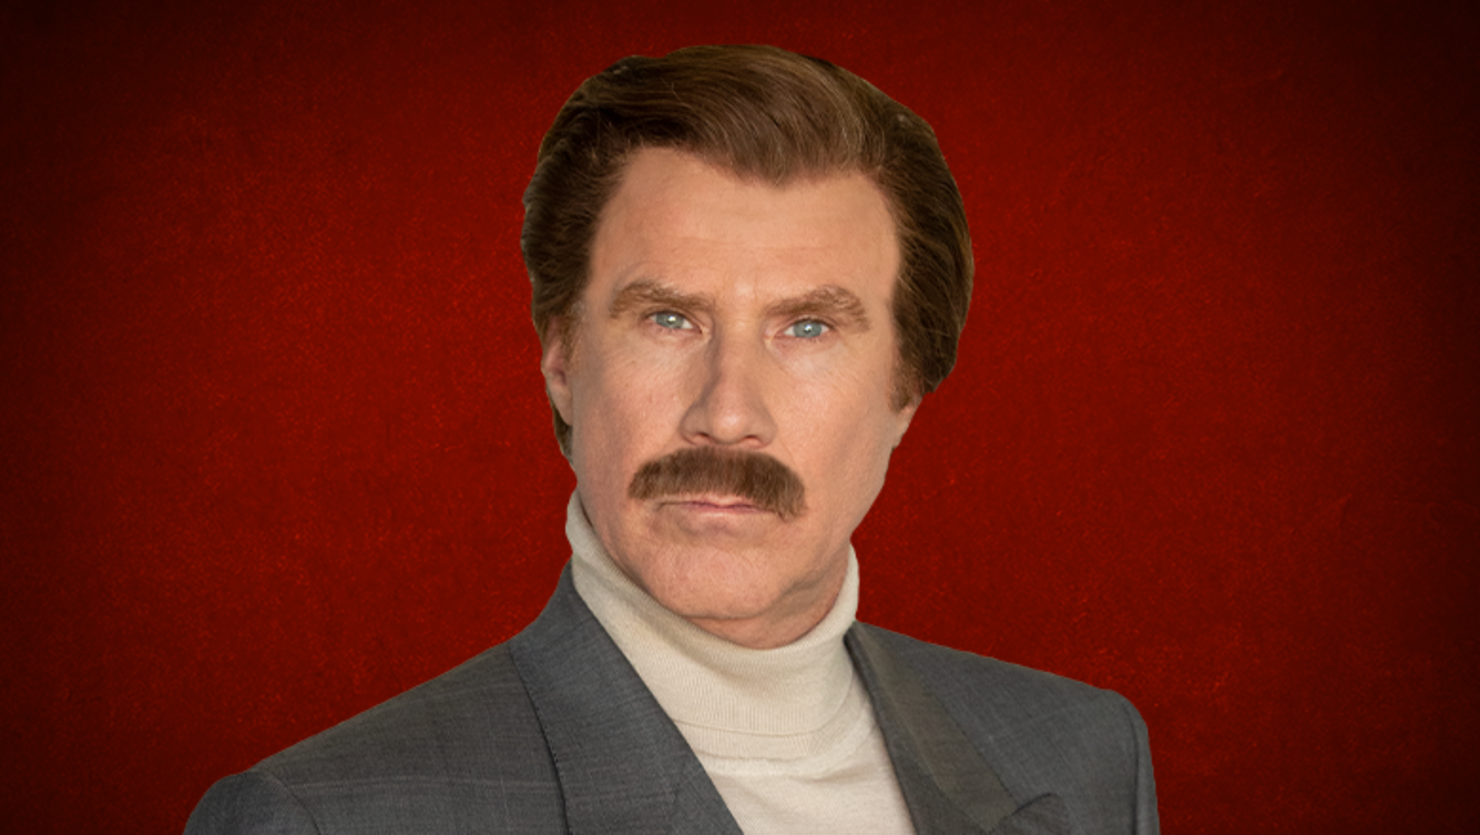 The Ron Burgundy Podcast